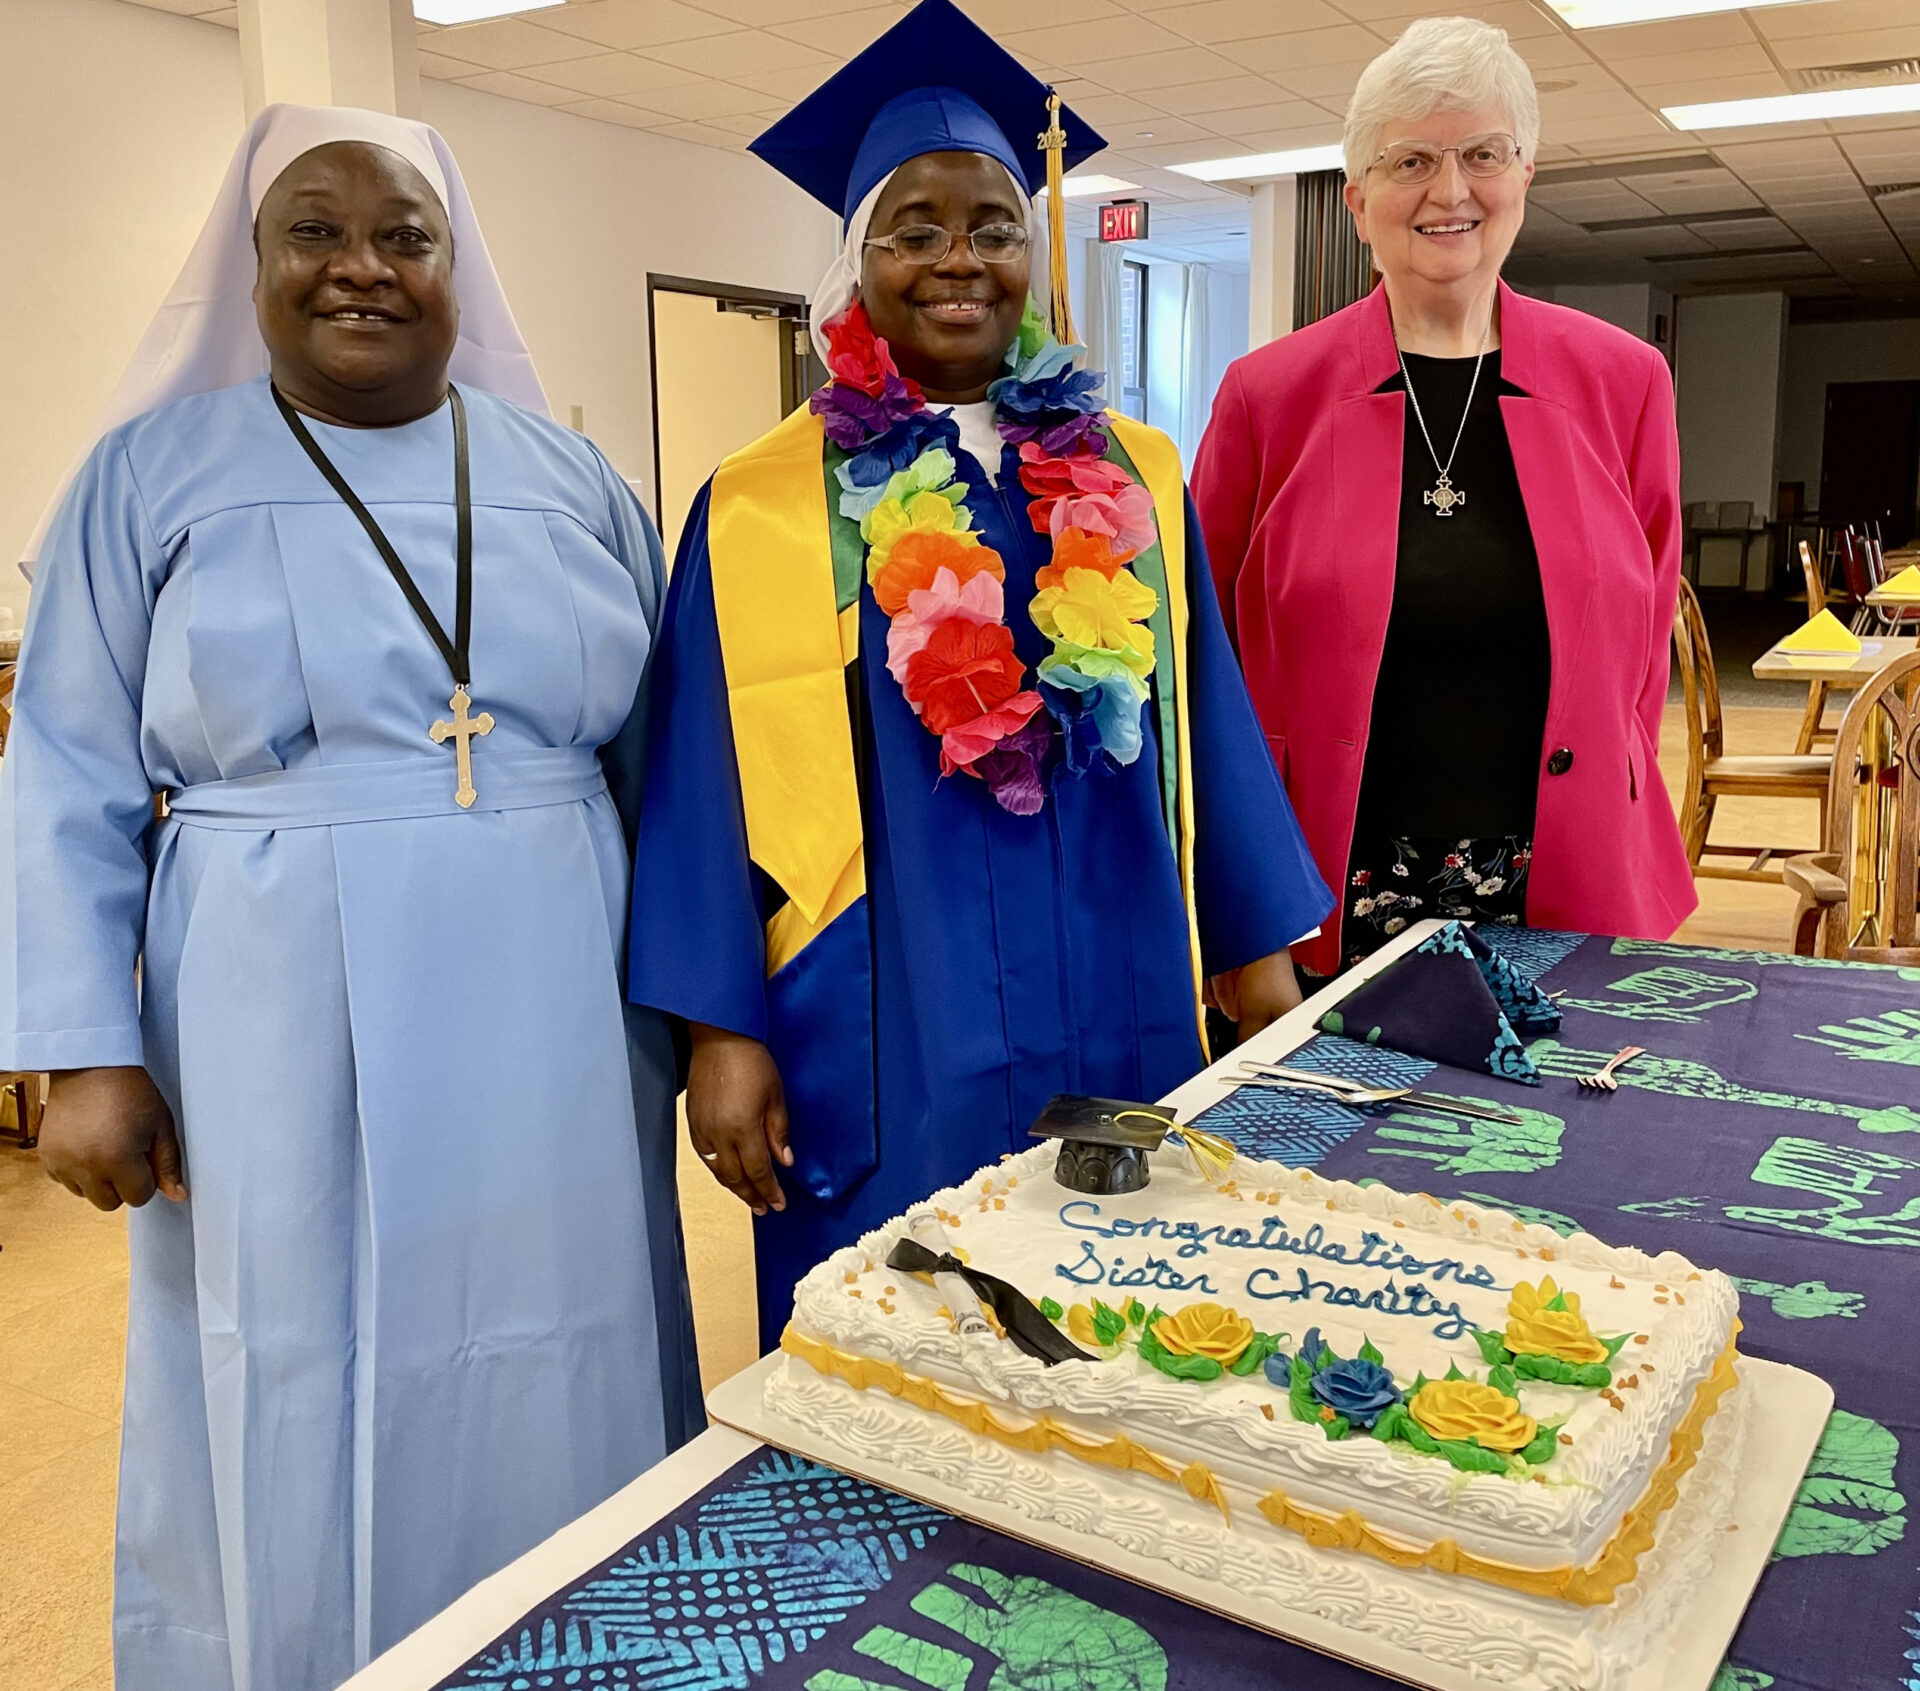 Sisters Sylvia, Charity, and Beverly with the graduation cake